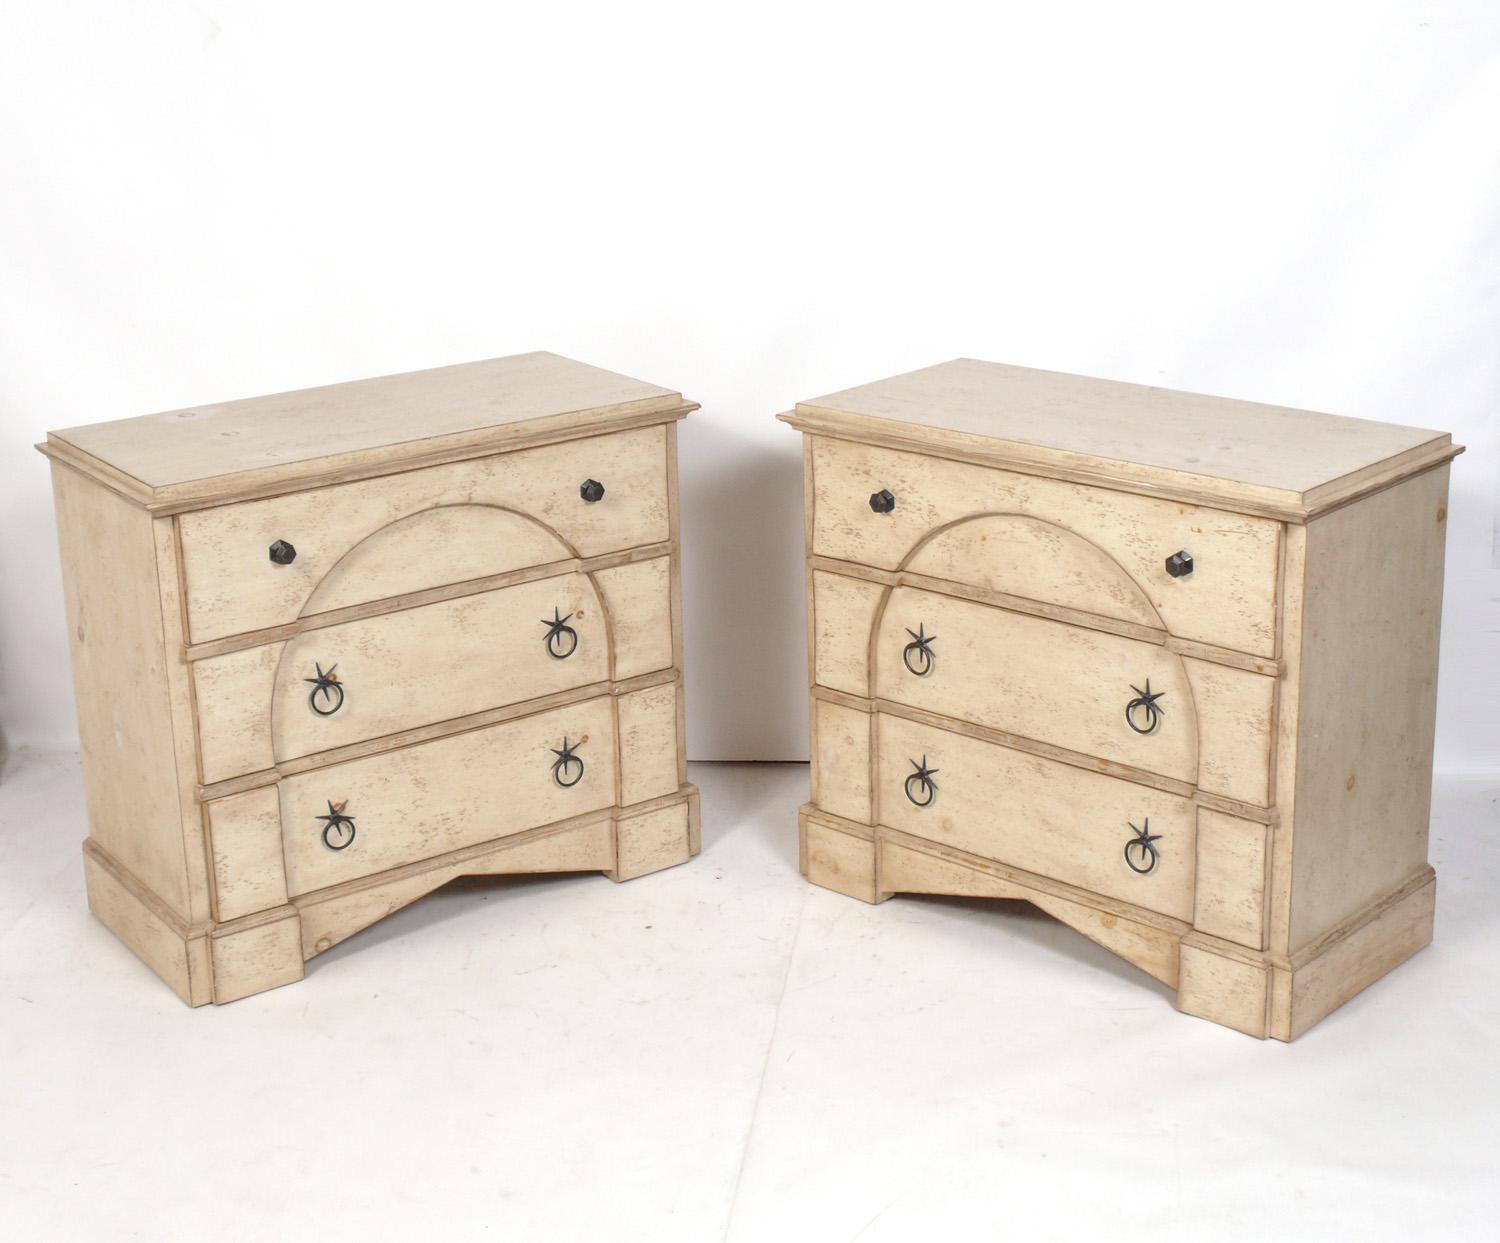 Selection of Distressed Ivory Color Chests, designed for The Milling Road Collection for Baker, American, circa 1980s. They are priced at $2600 each or $4800 for the pair. They are constructed of wood with an ivory color distressed finish, and